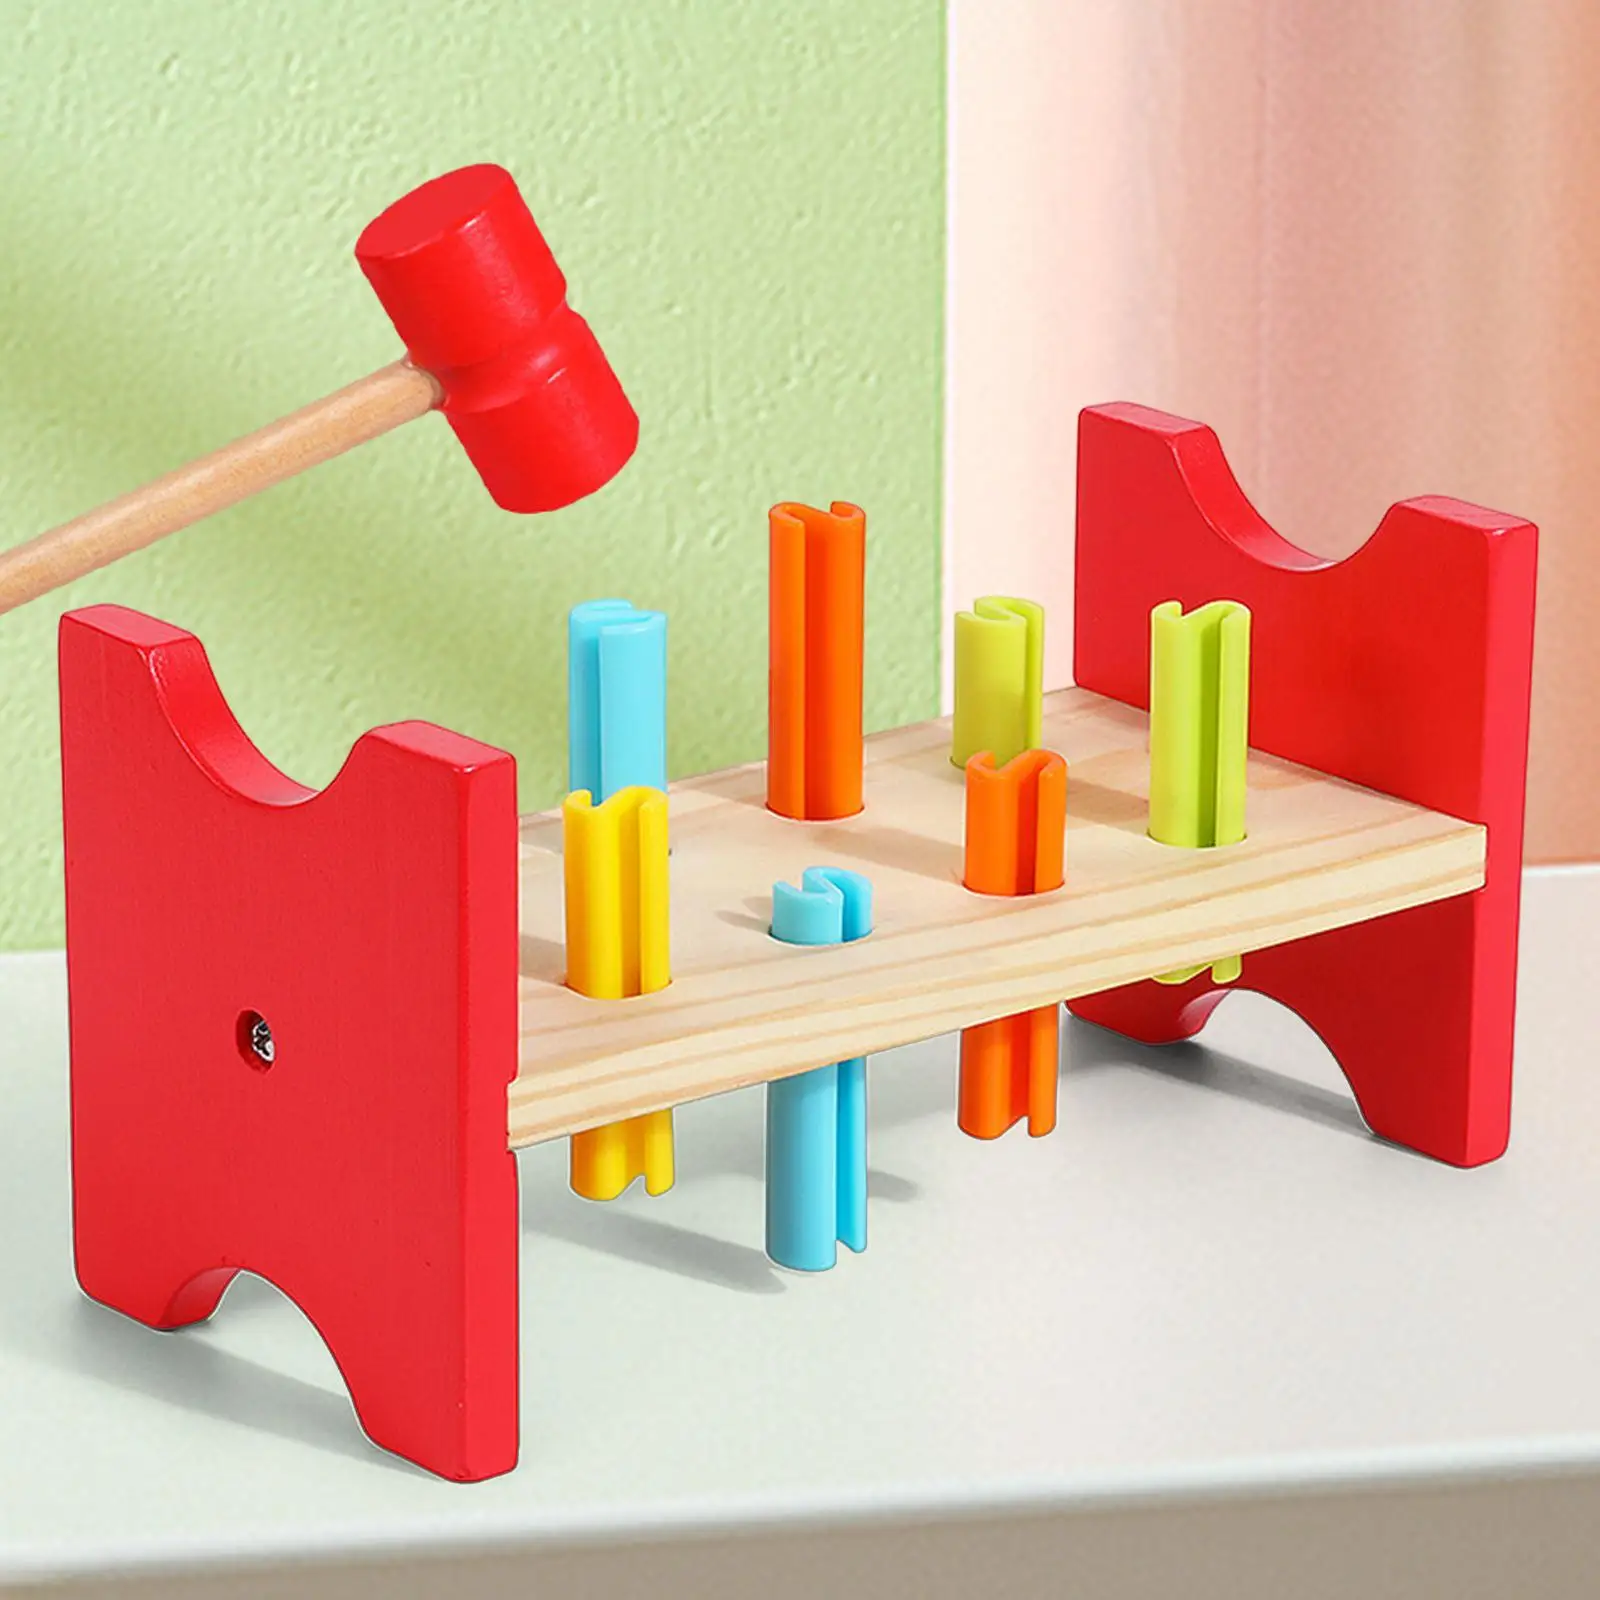 

Pounding Bench Wood Toy with Mallet Montessori Fine Motor Skills Pounding Pegs Toy for Birthday Gift Kids Party Favor Preschool